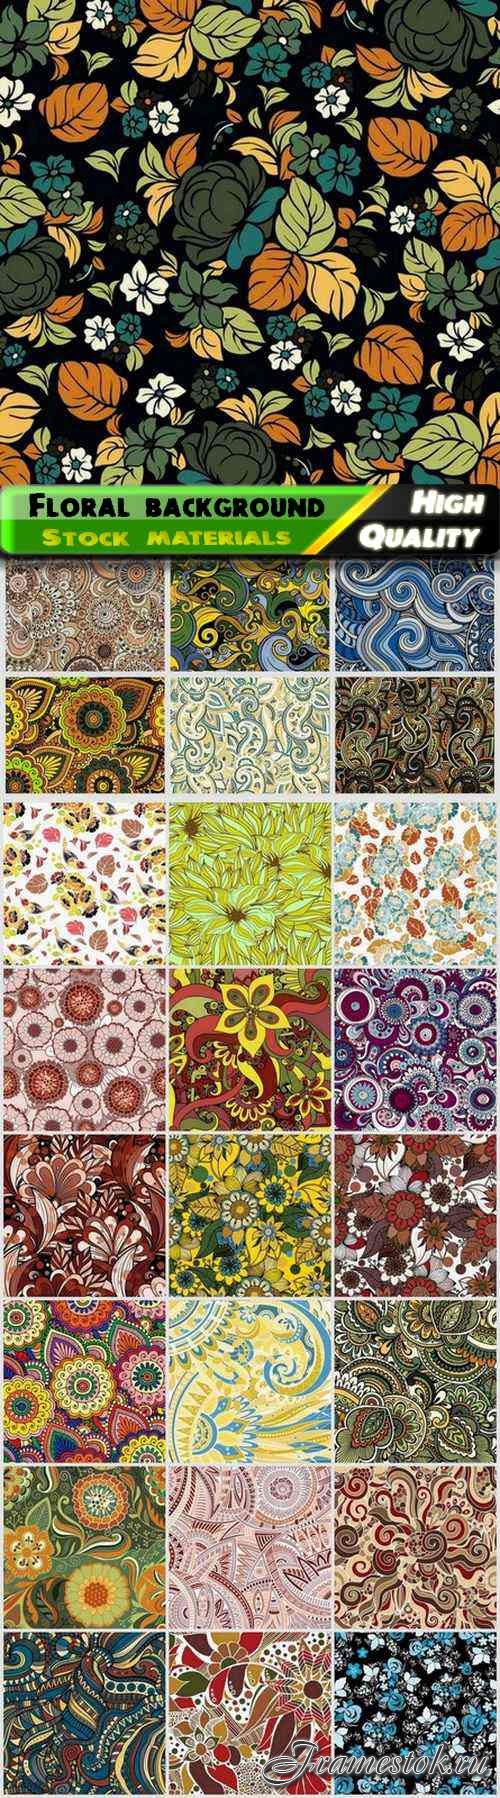 Abstract floral background with leaves and flowers 25 Eps